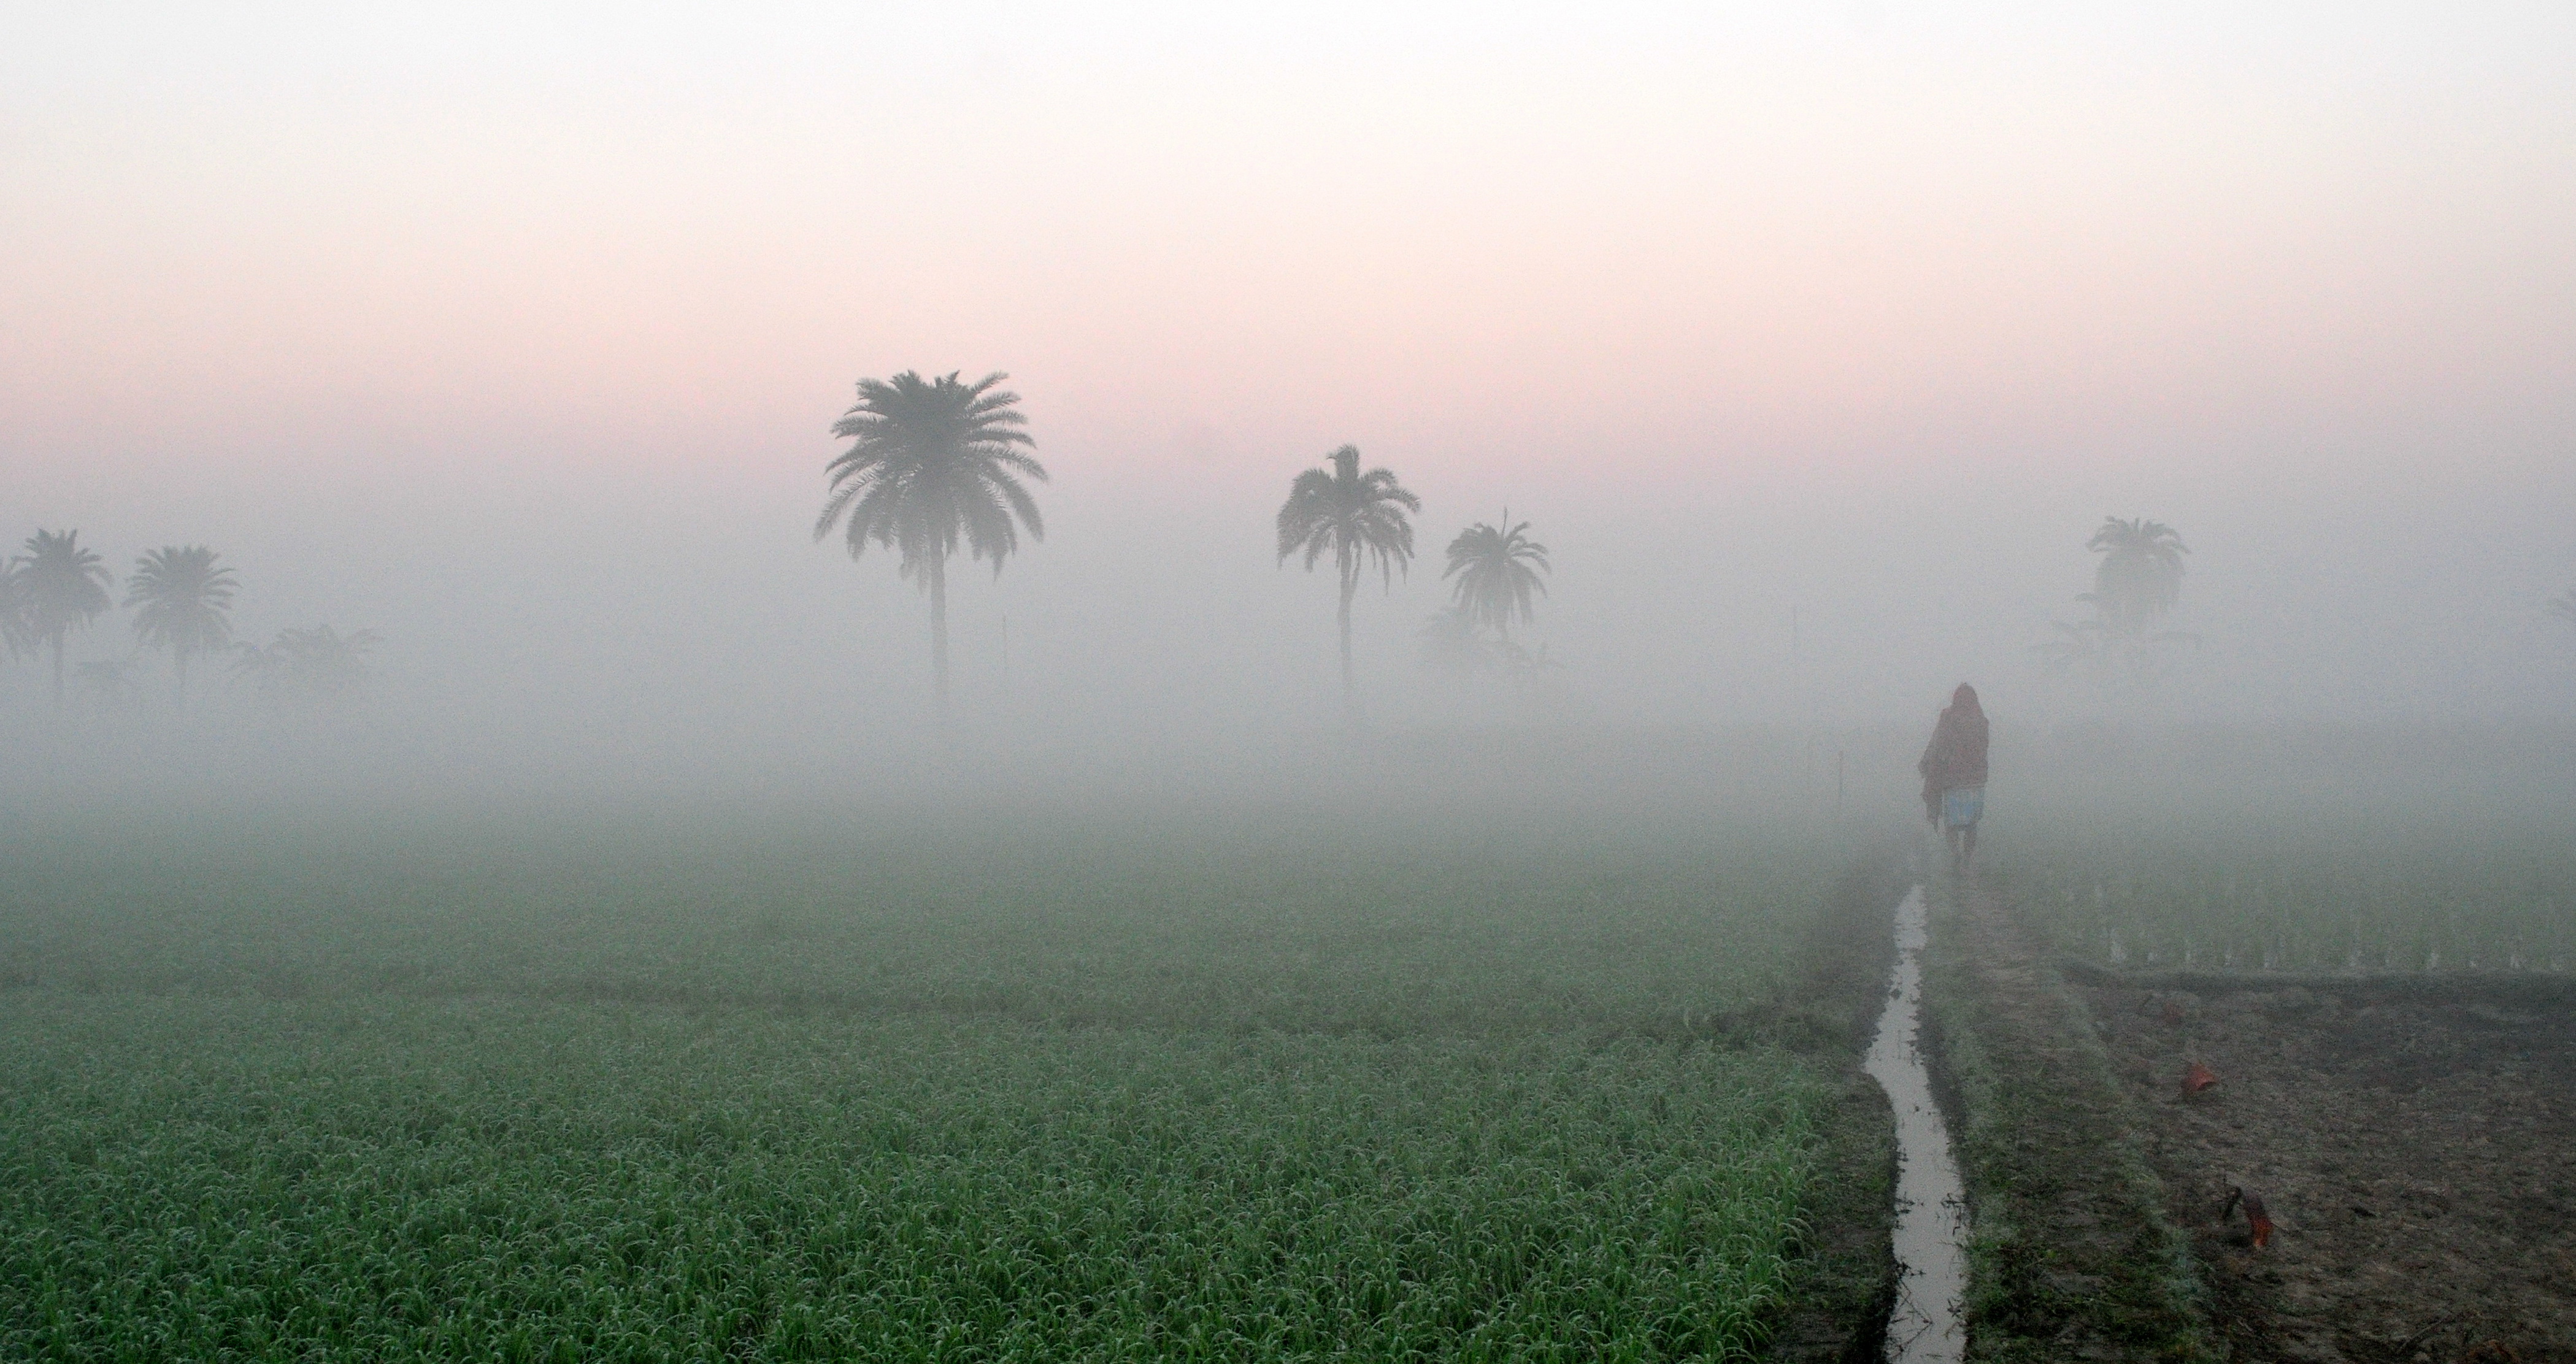 File:Agriculture in India, Sunrise time at a village.jpg - Wikimedia ...